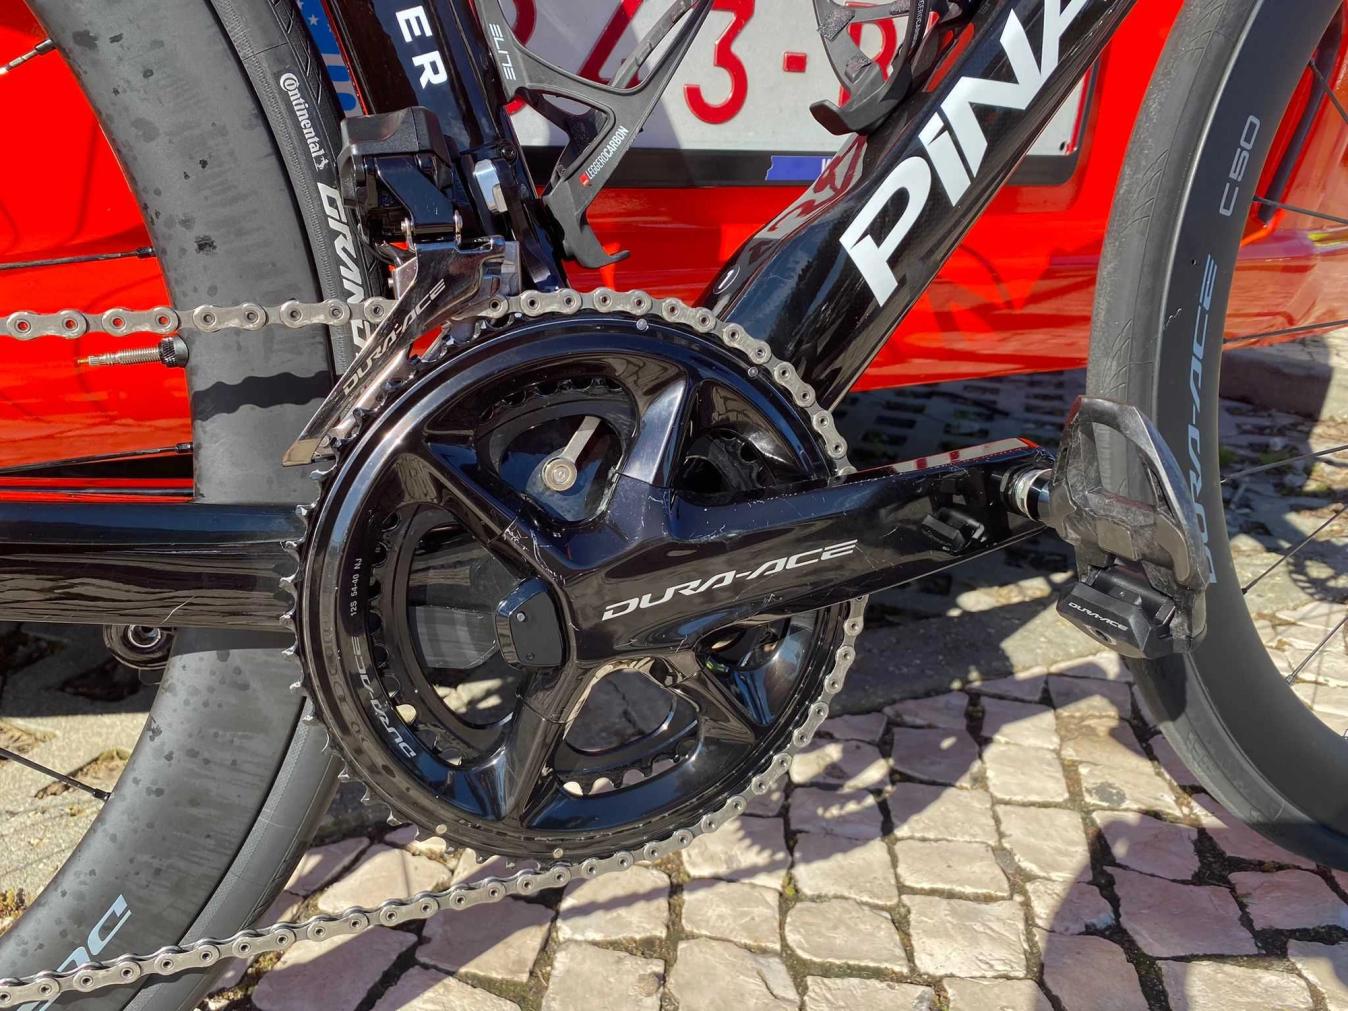 The Shimano Dura-Ace Di2 groupset